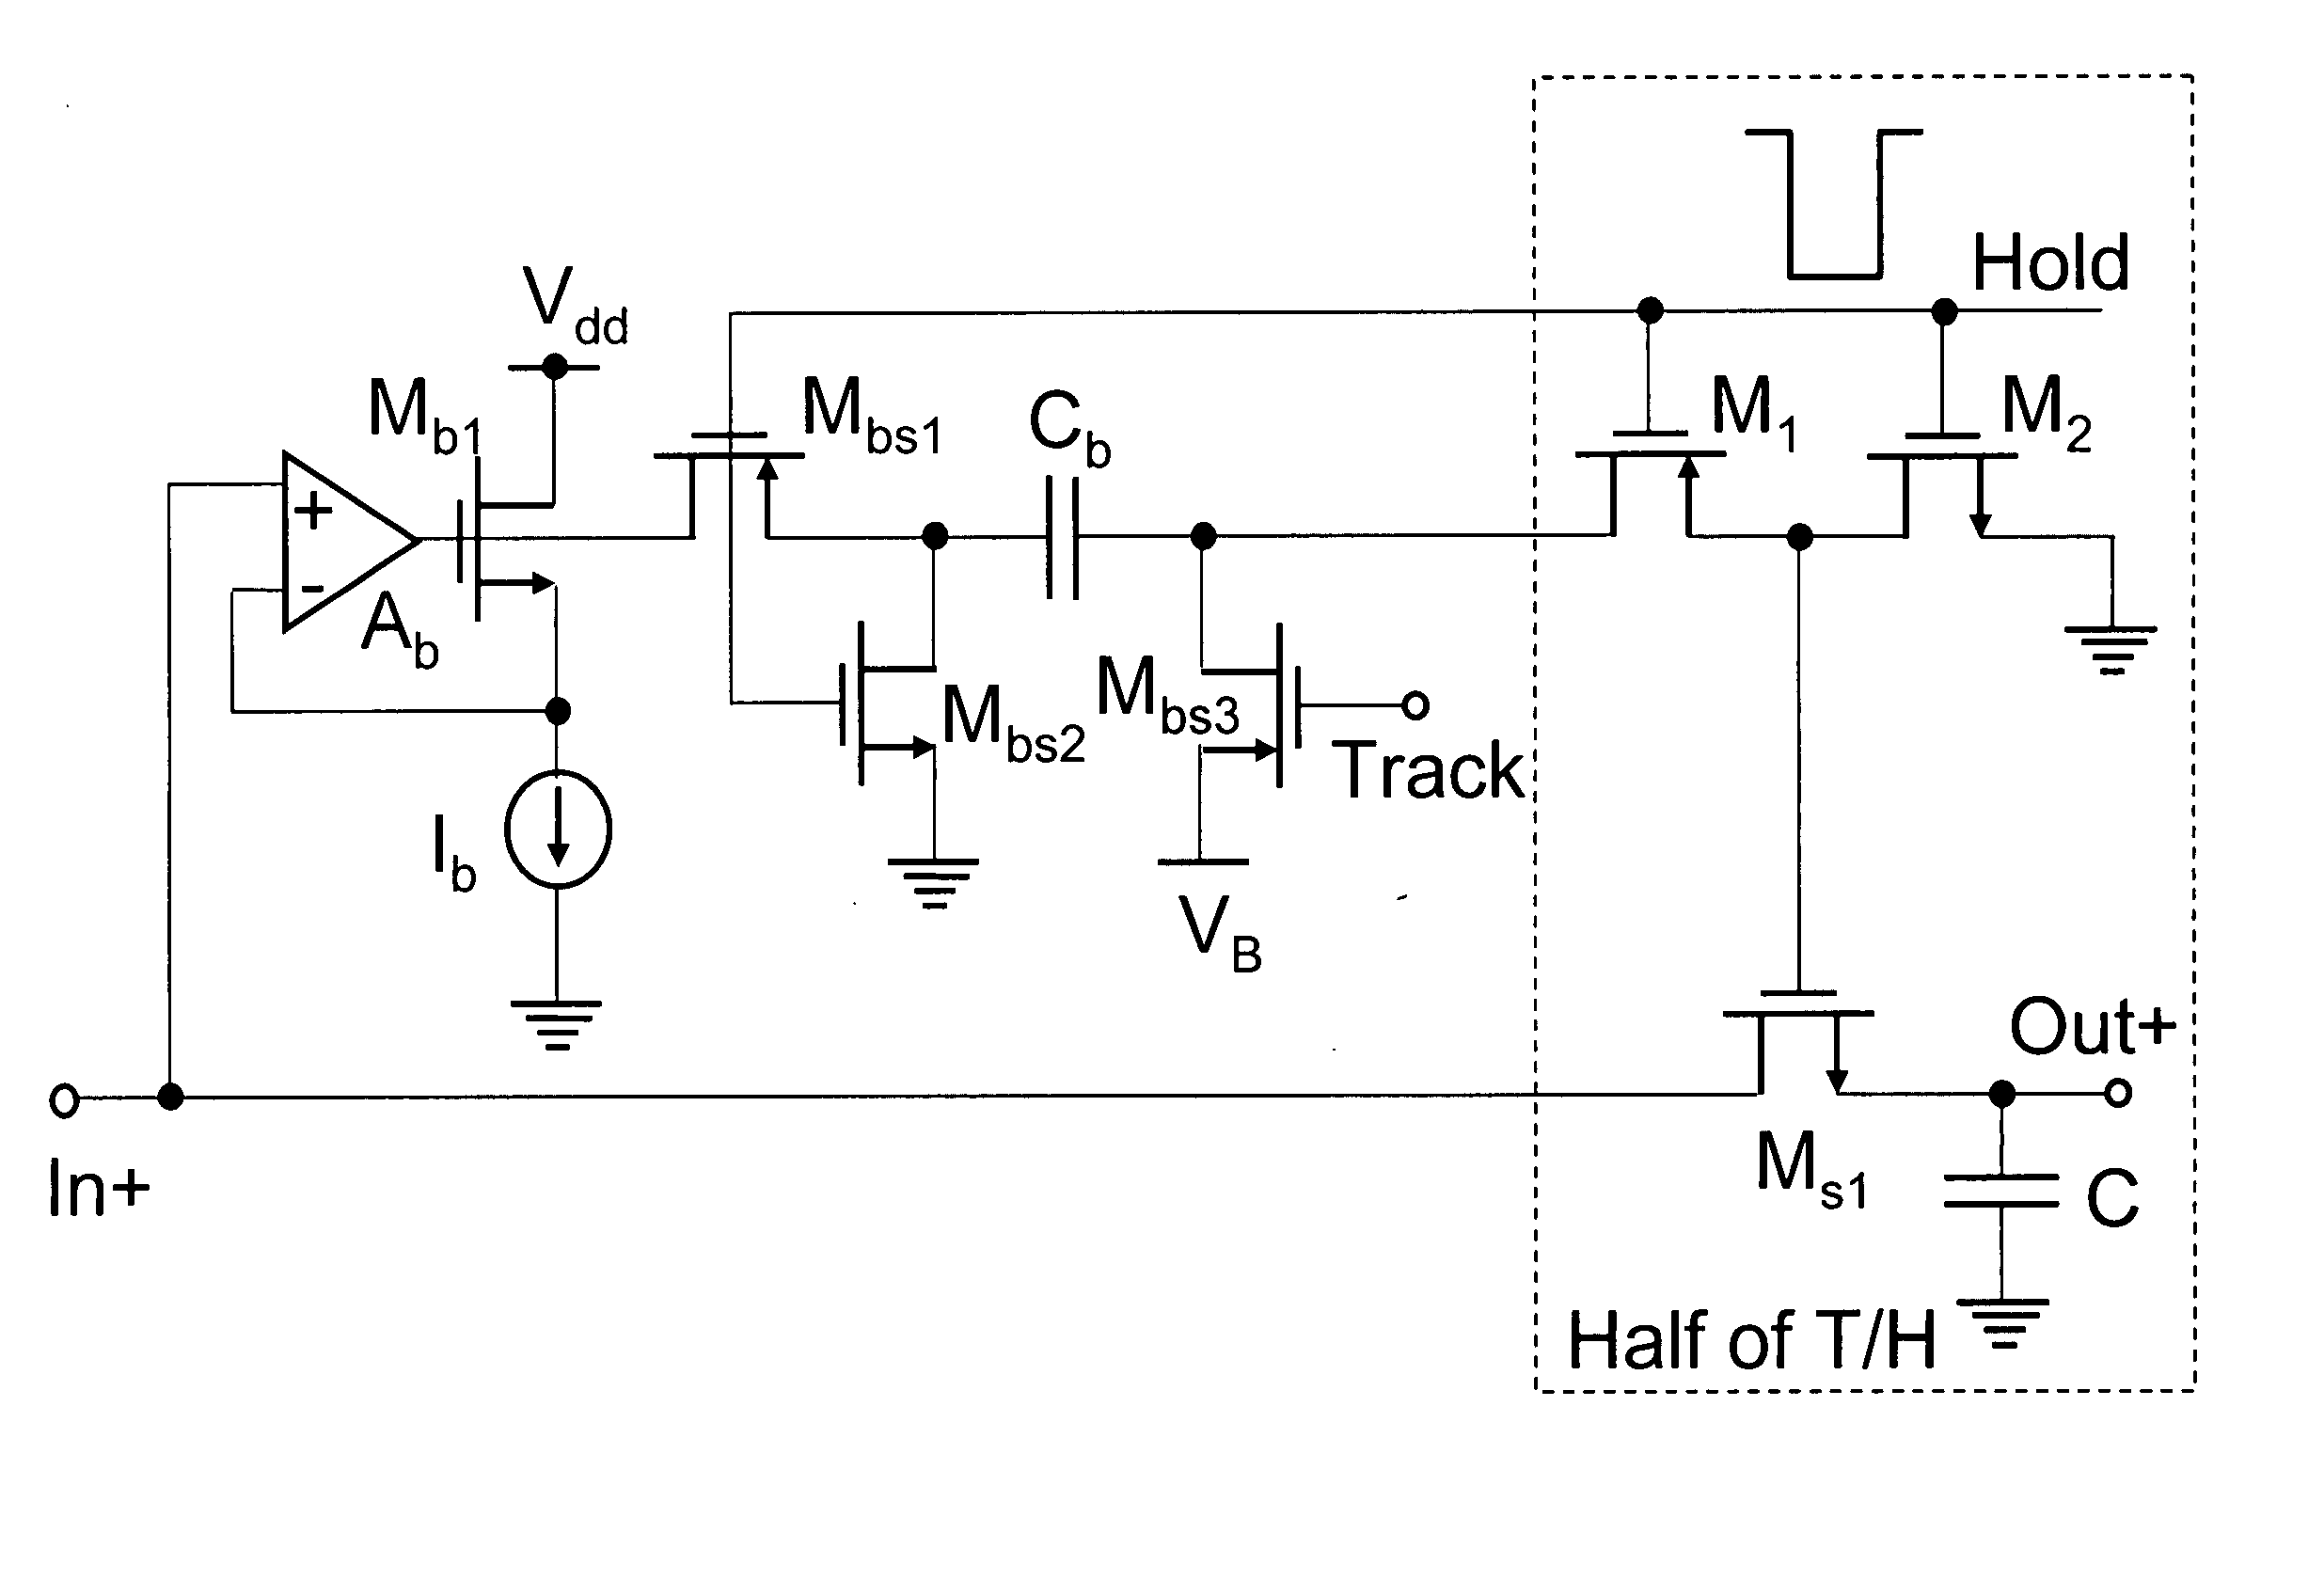 Switch linearized track and hold circuit for switch linearization